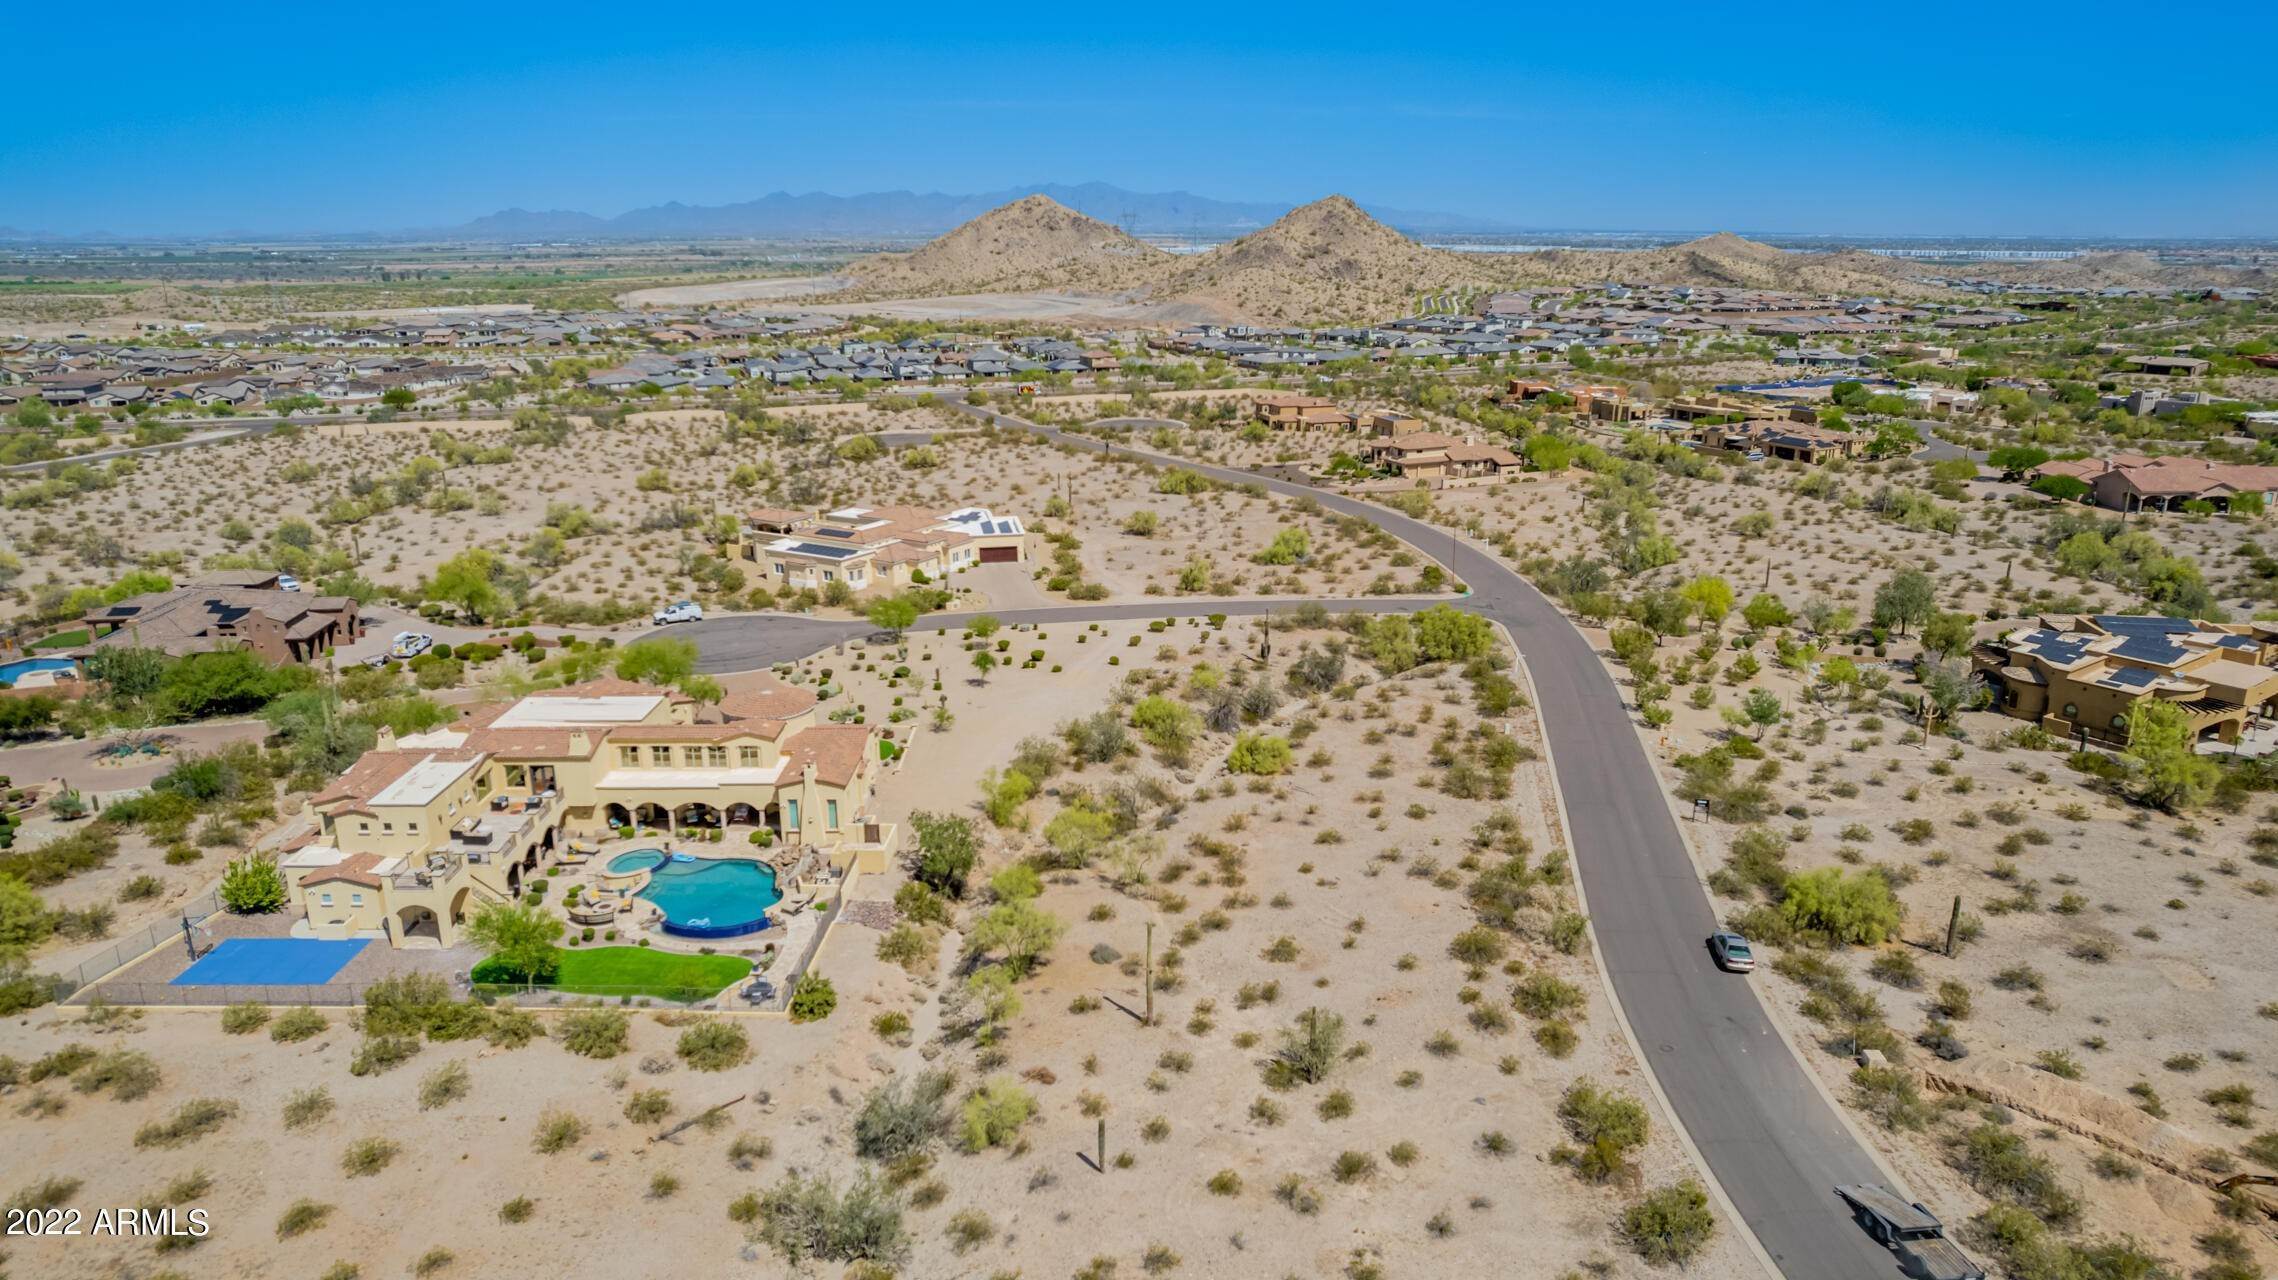 17. Land for Sale at Goodyear, AZ 85338